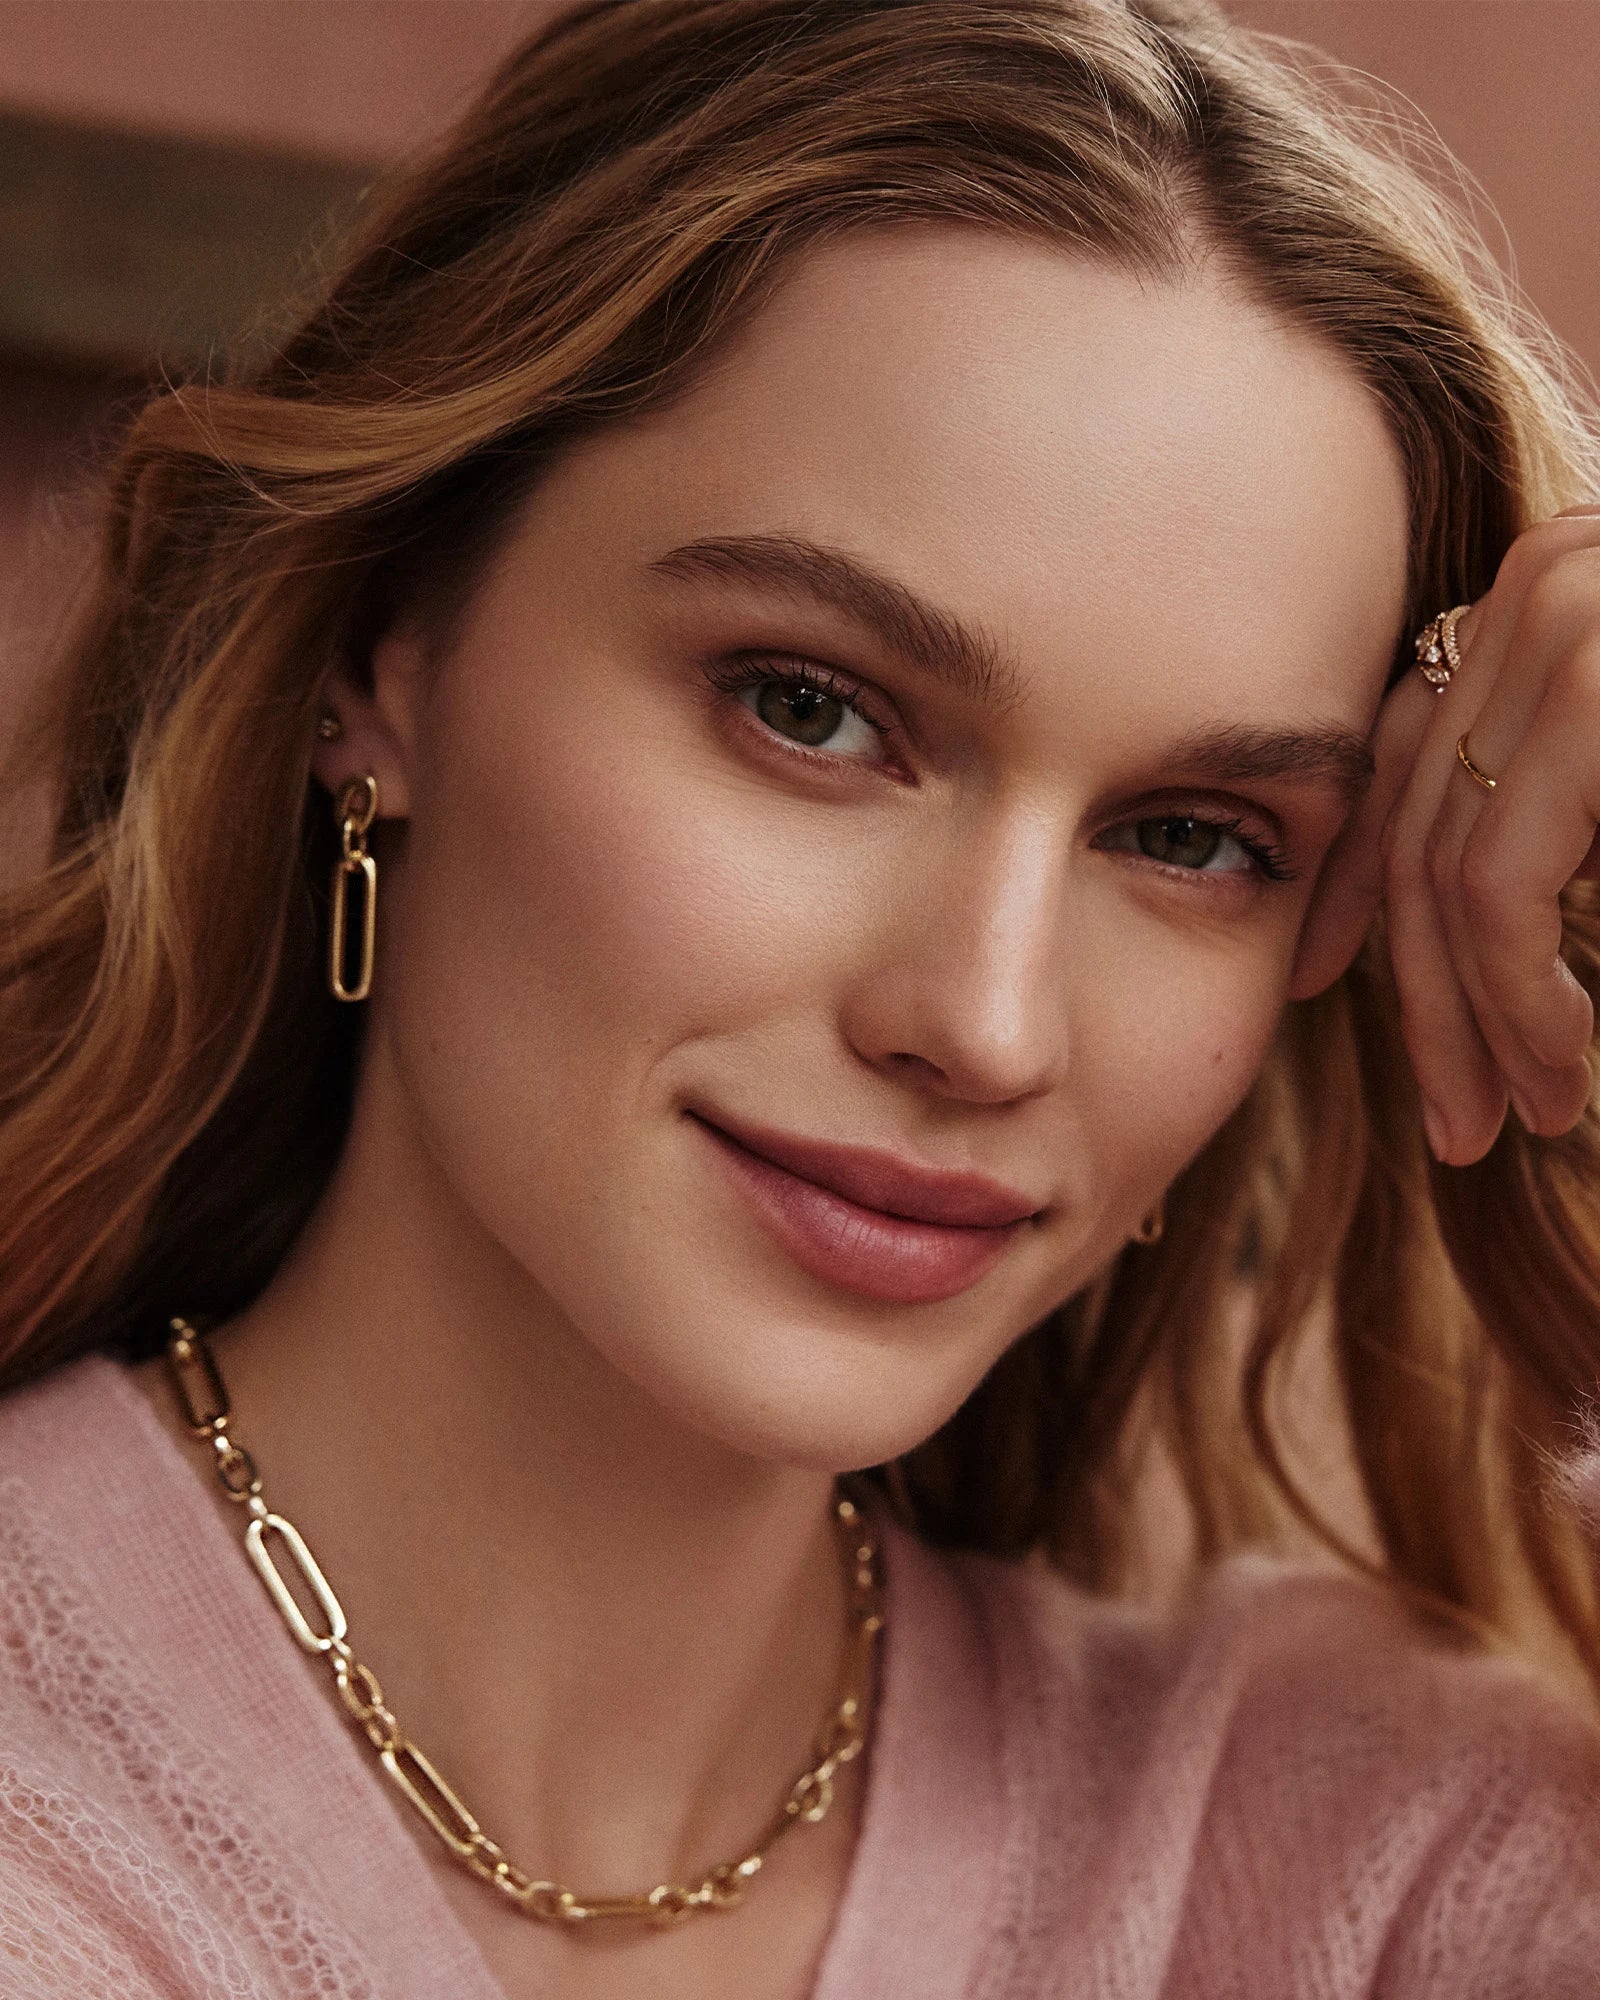 Kendra Scott | Heather Linear Earrings in Gold - Giddy Up Glamour Boutique